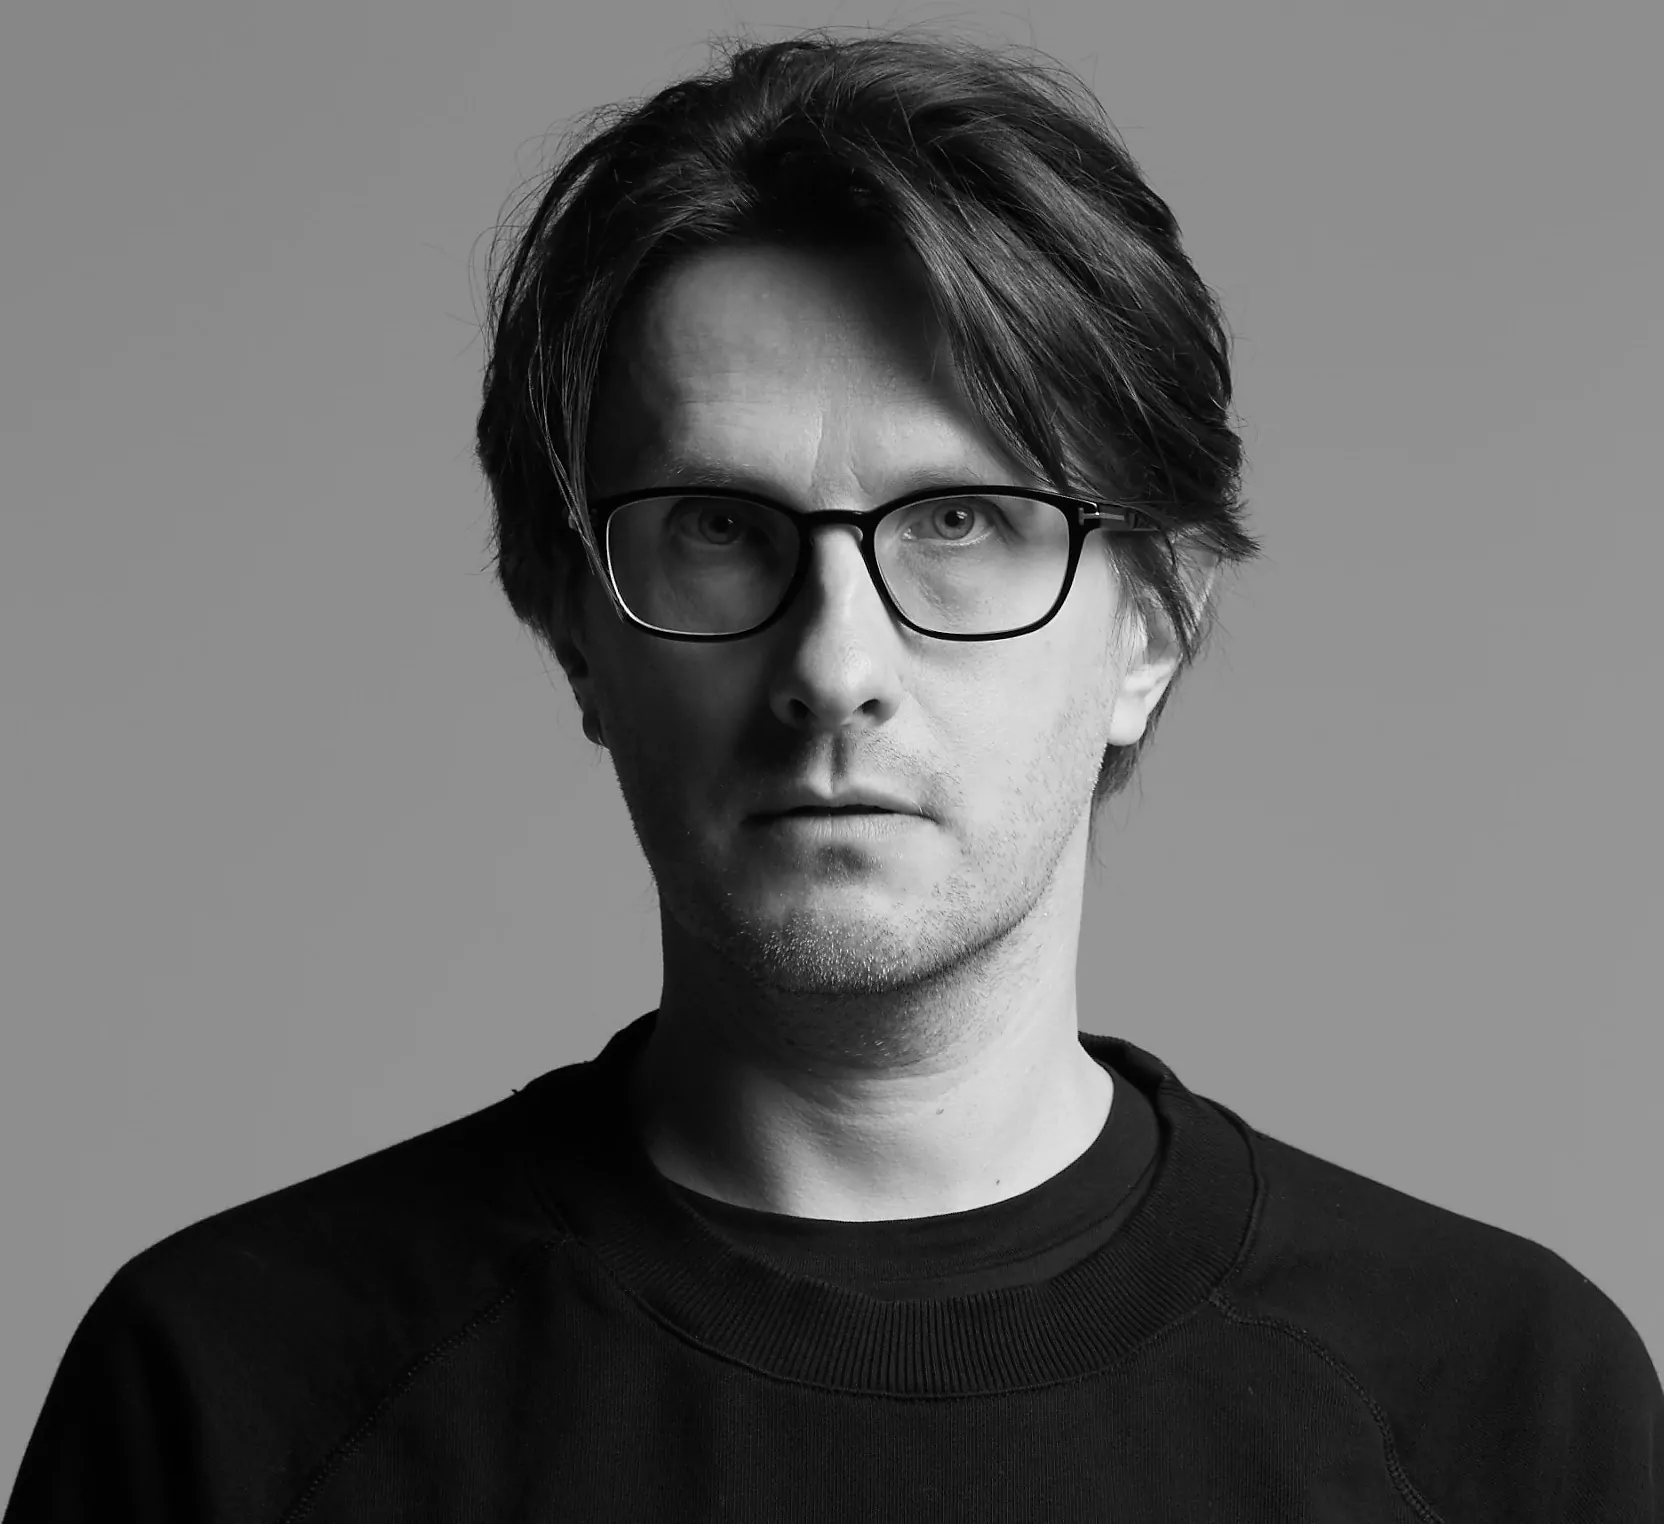 STEVEN WILSON announces new tour dates for 2021, ahead of forthcoming album ‘THE FUTURE BITES’